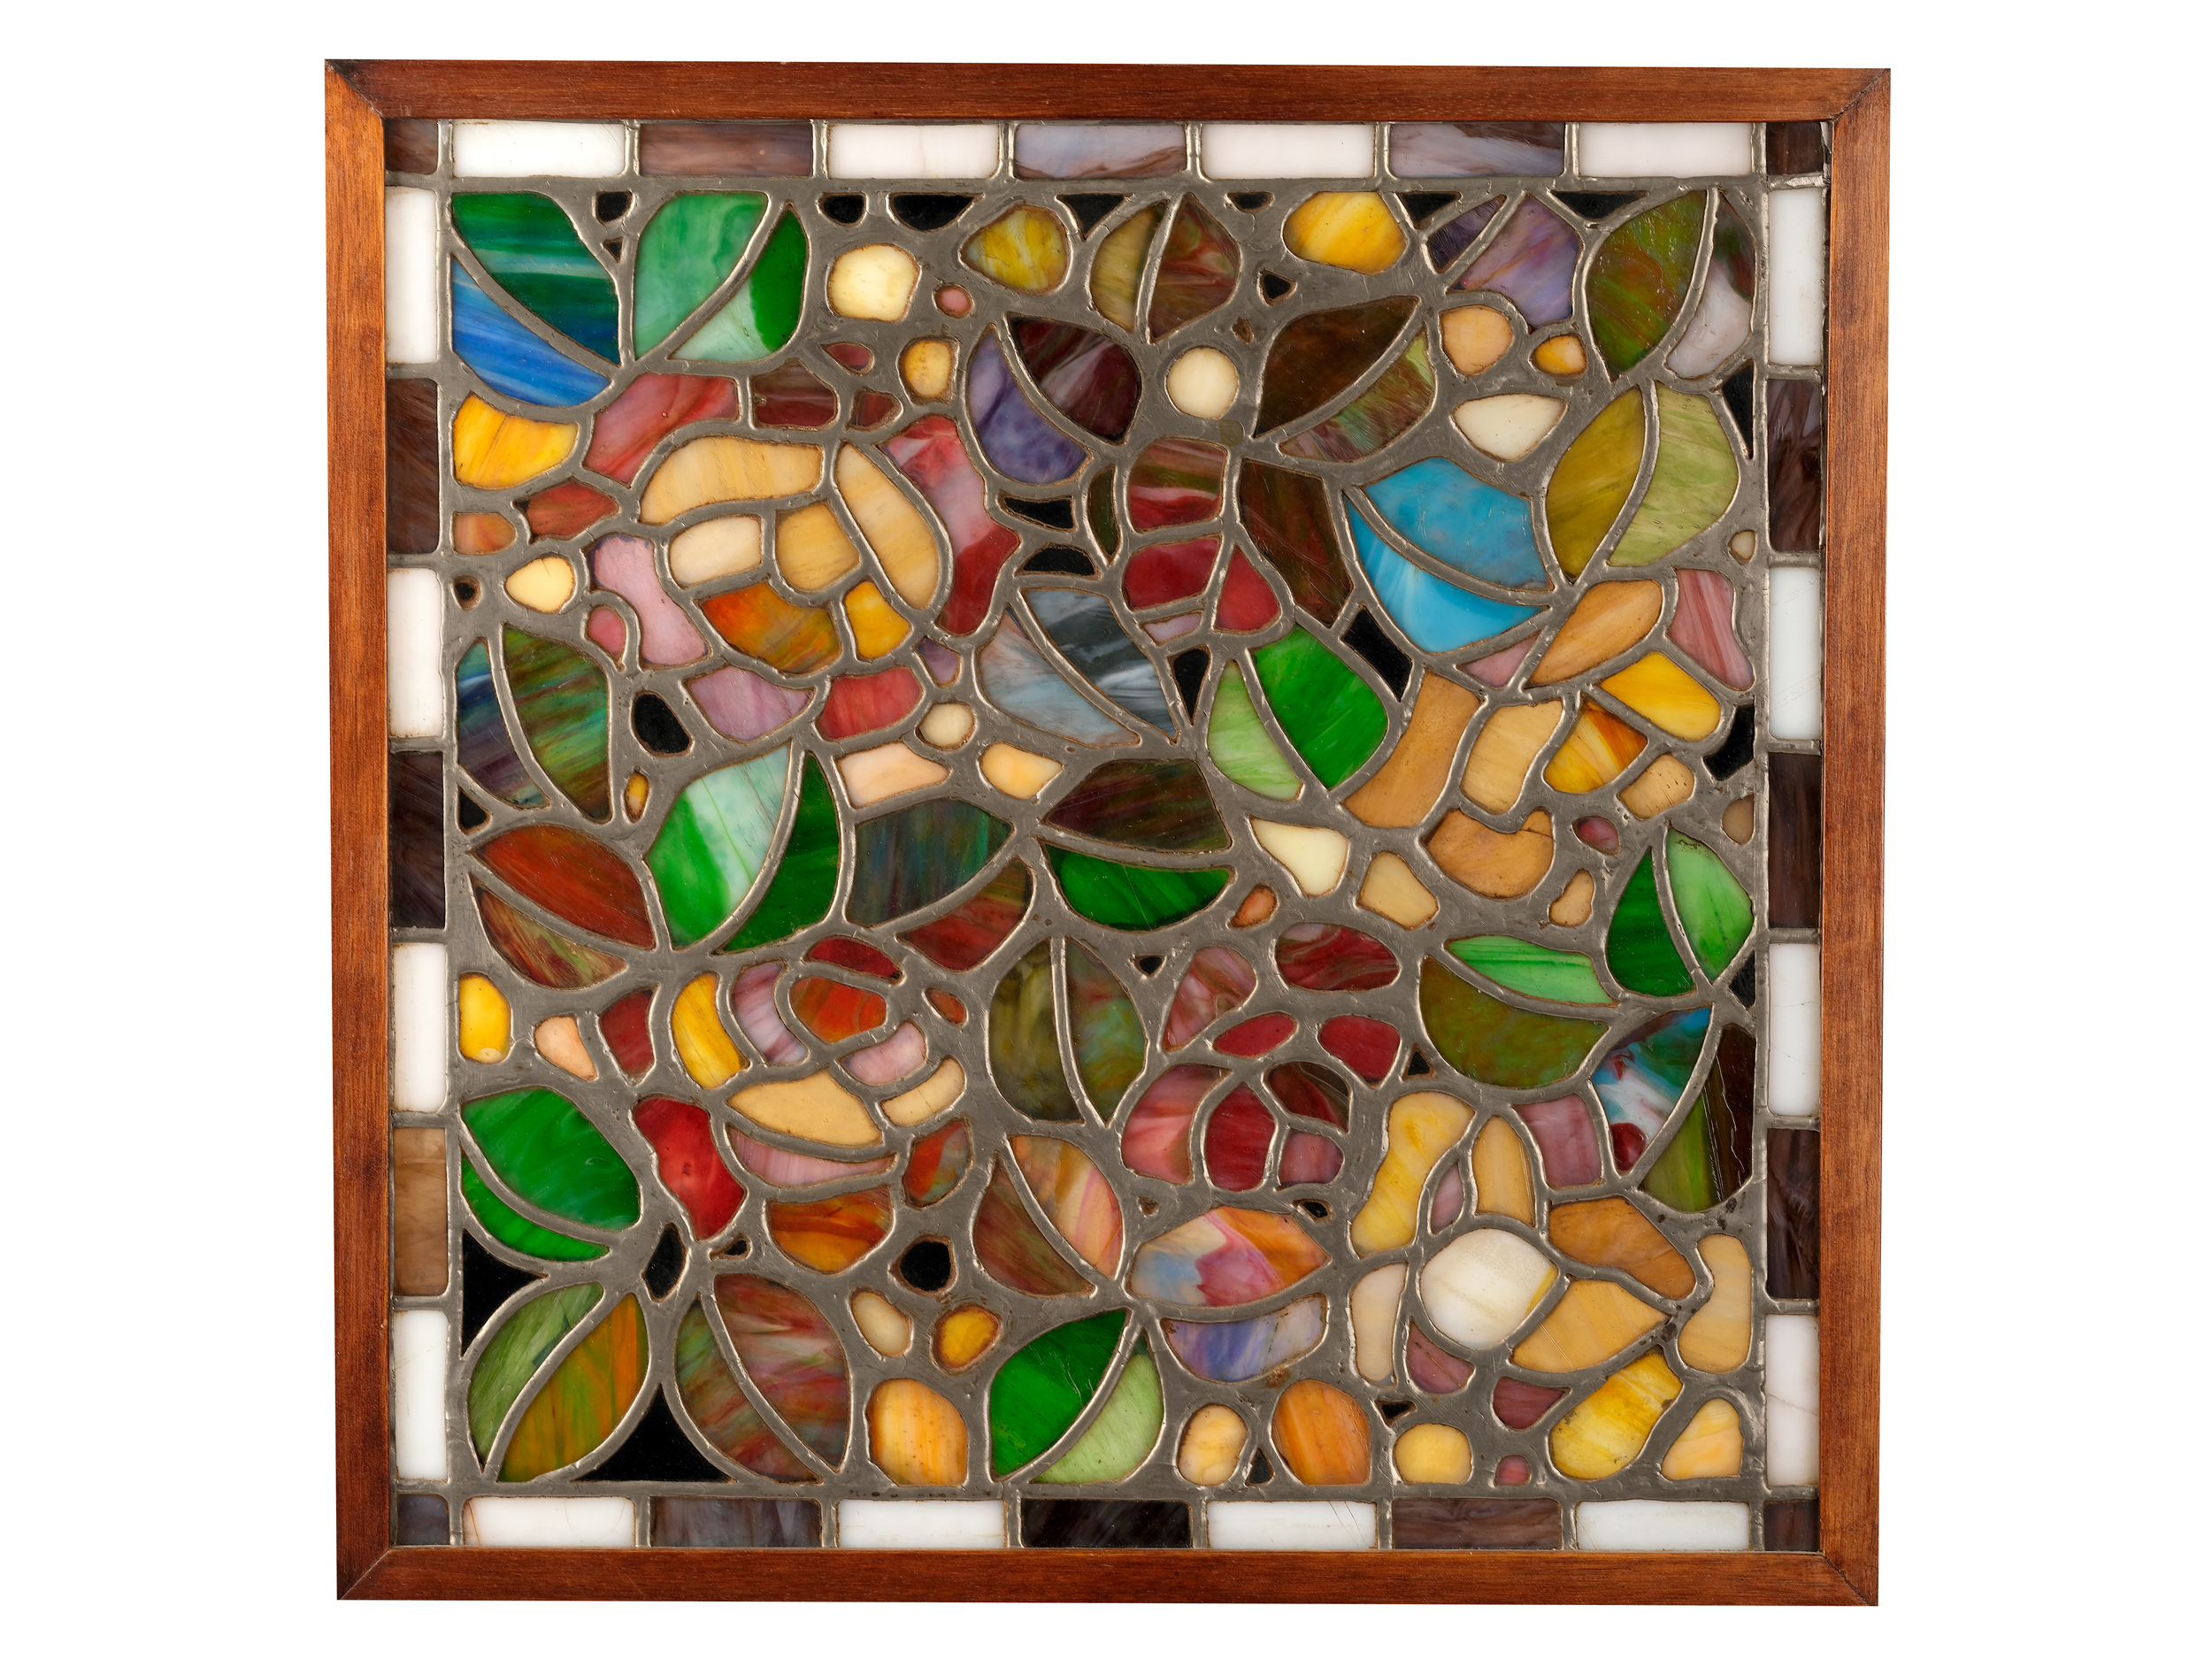 Art Nouveau window, Around 1900/20, Colorful leaded glass in wooden frame - Image 2 of 2